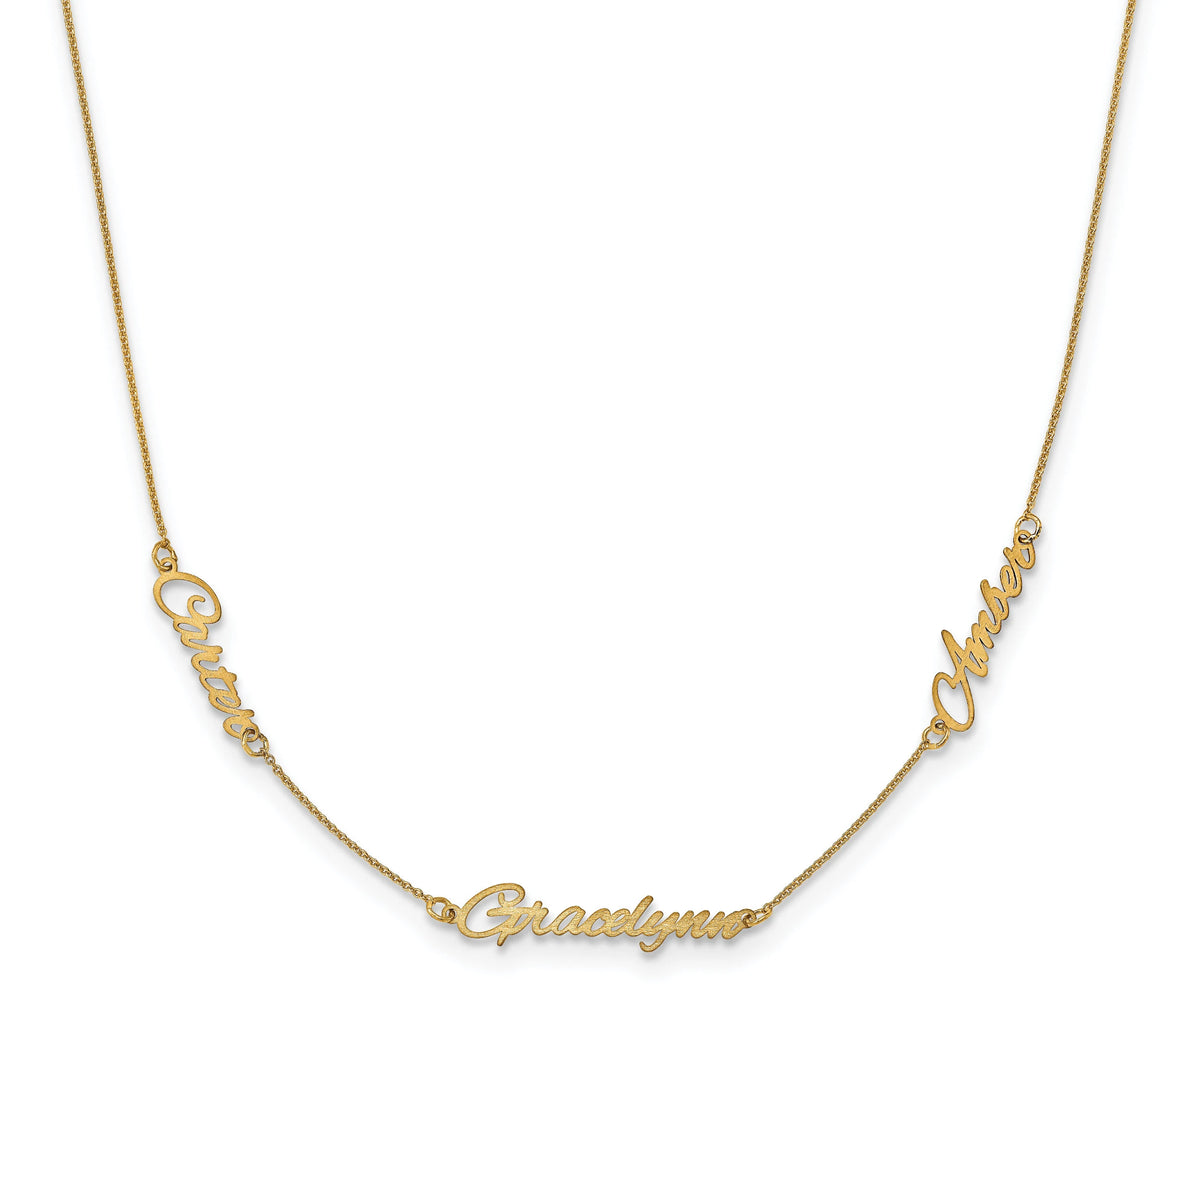 3 Name Necklace - Sterling Silver Gold Plated Silver 10k & 14k Polished Finish ( 9 Characters) Gift Box Included